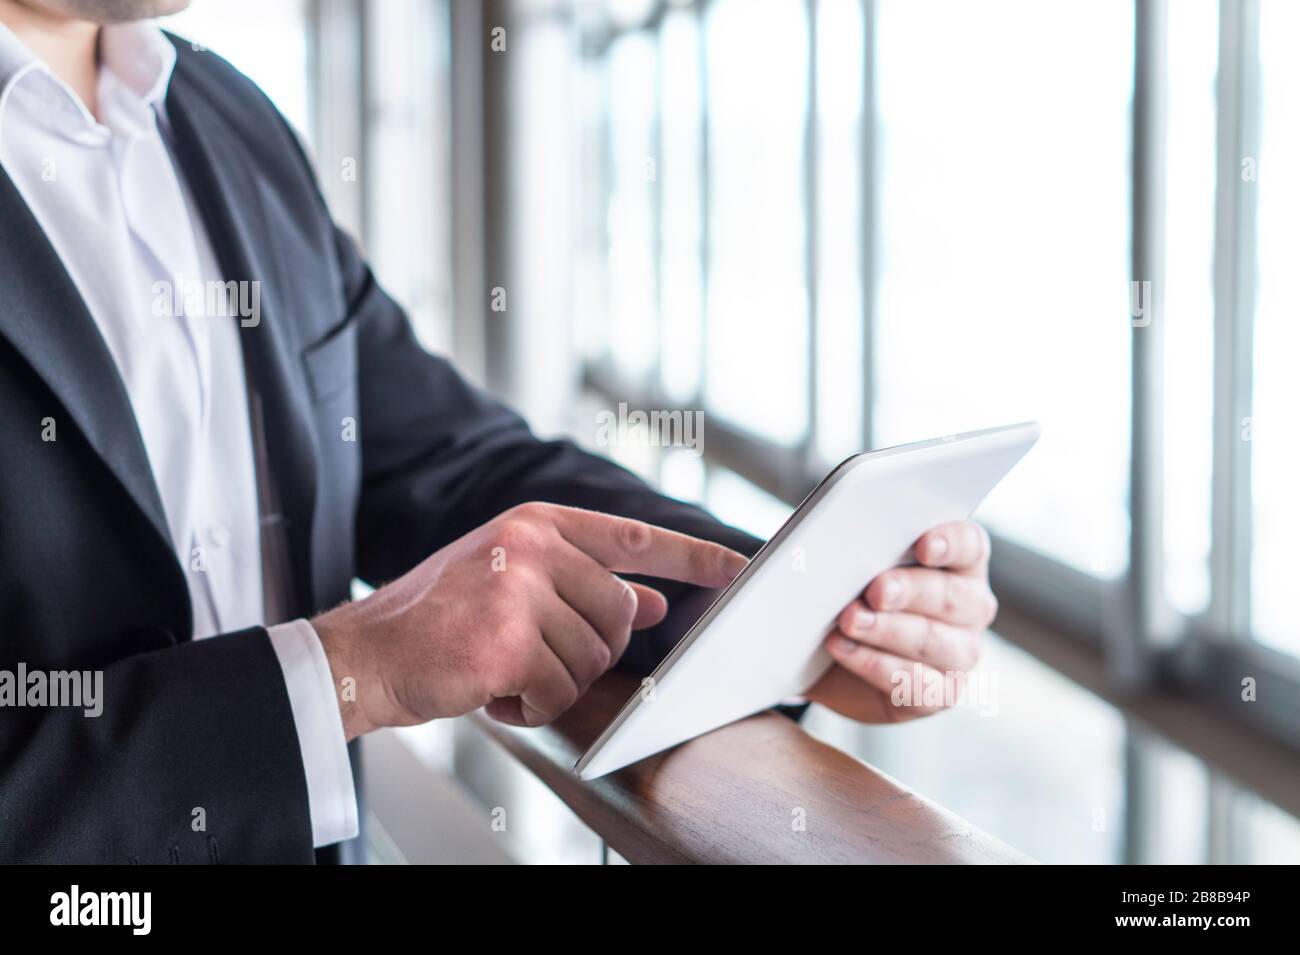 Business man using tablet by the window in modern glass office building. Businessman holding smart mobile device and working. Pressing touch screen. Stock Photo